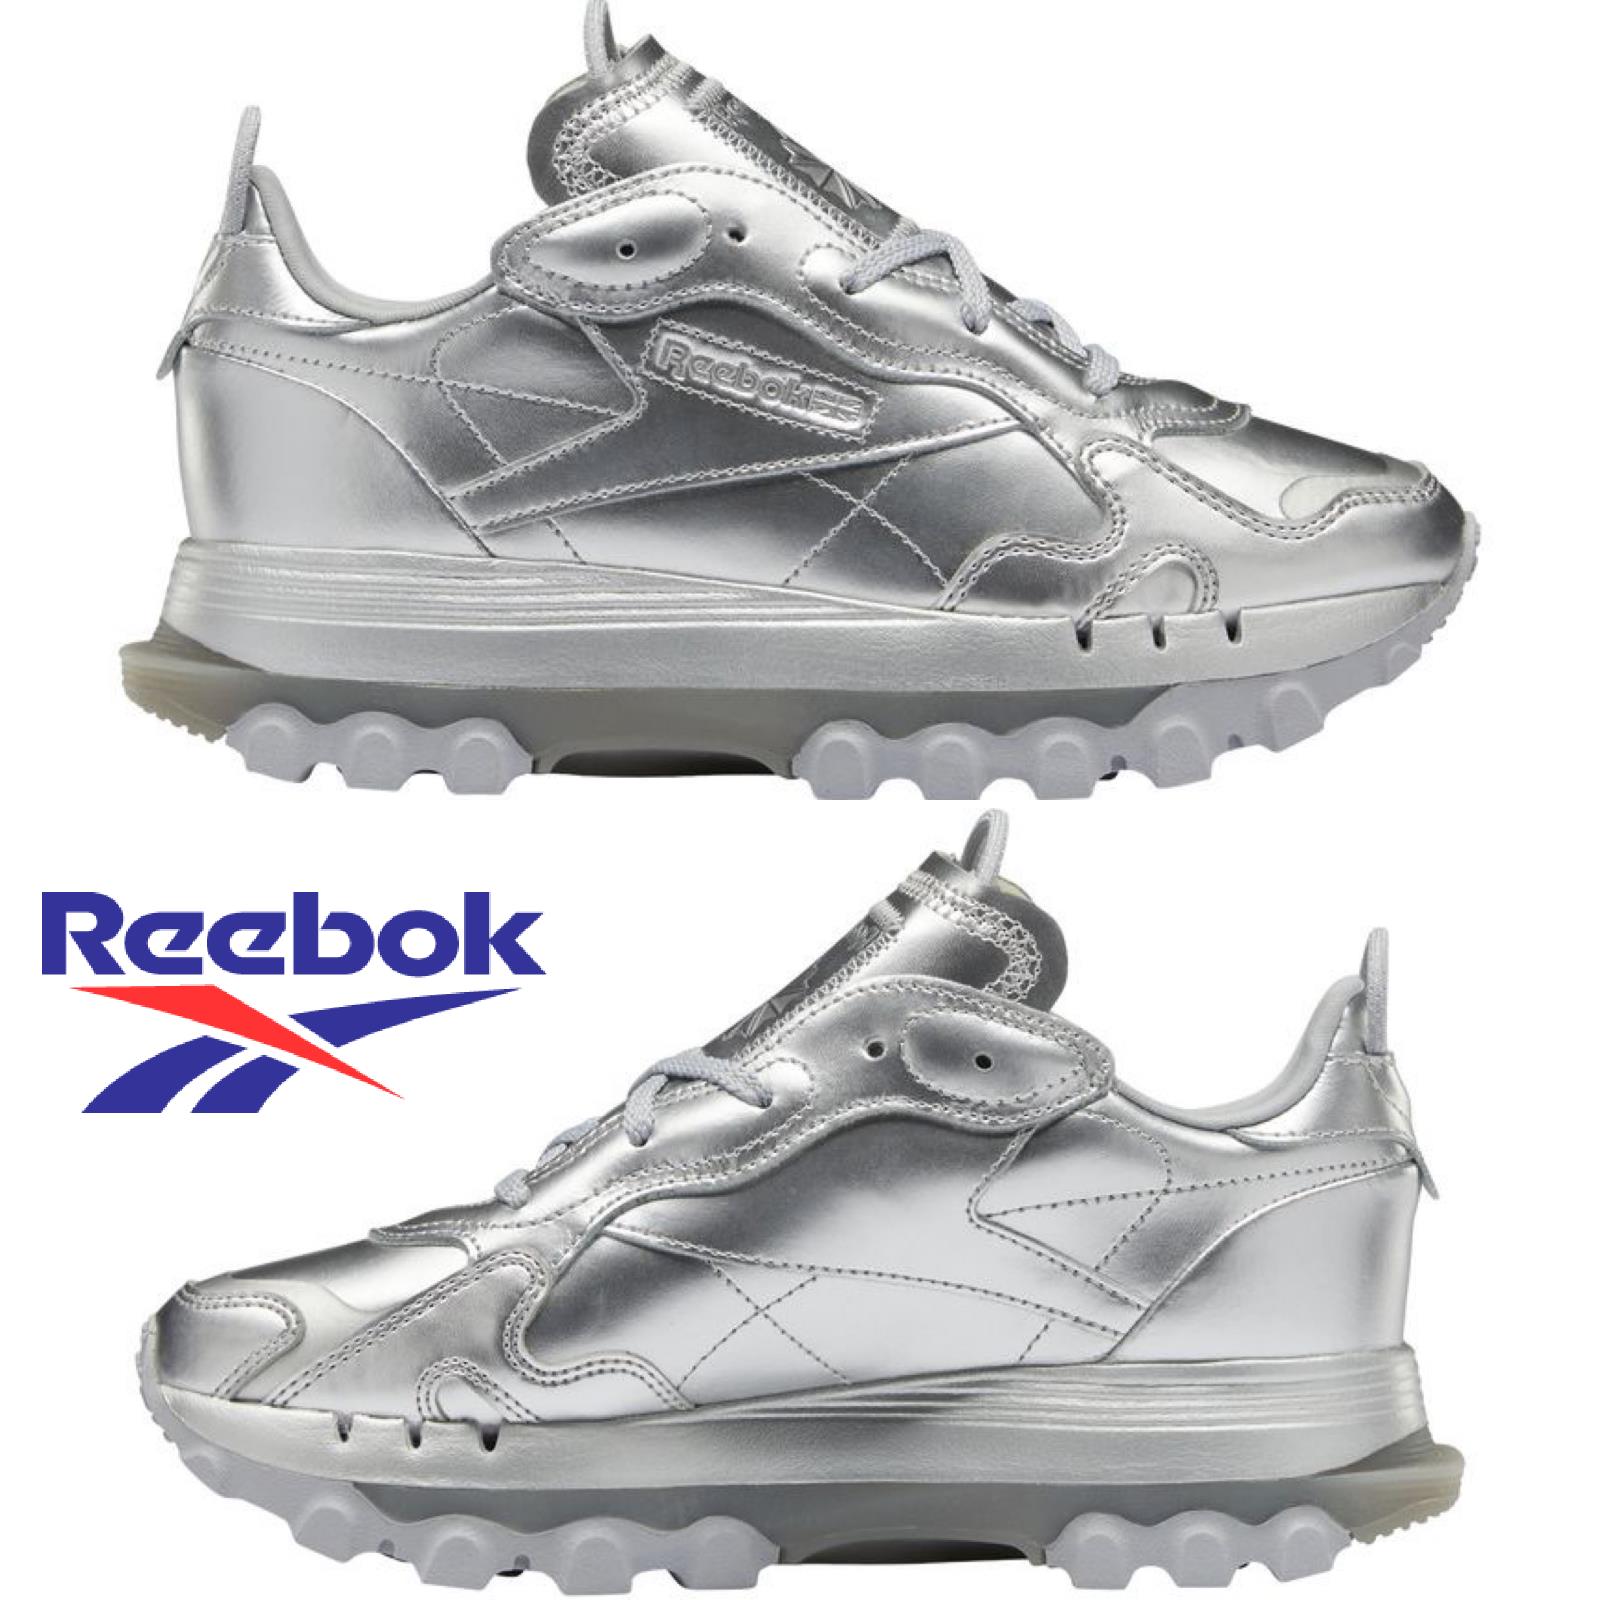 Cardi B X Reebok Classic Leather Women`s Casual Shoes Sport Sneakers Silver - Silver , Silver/Silver Manufacturer